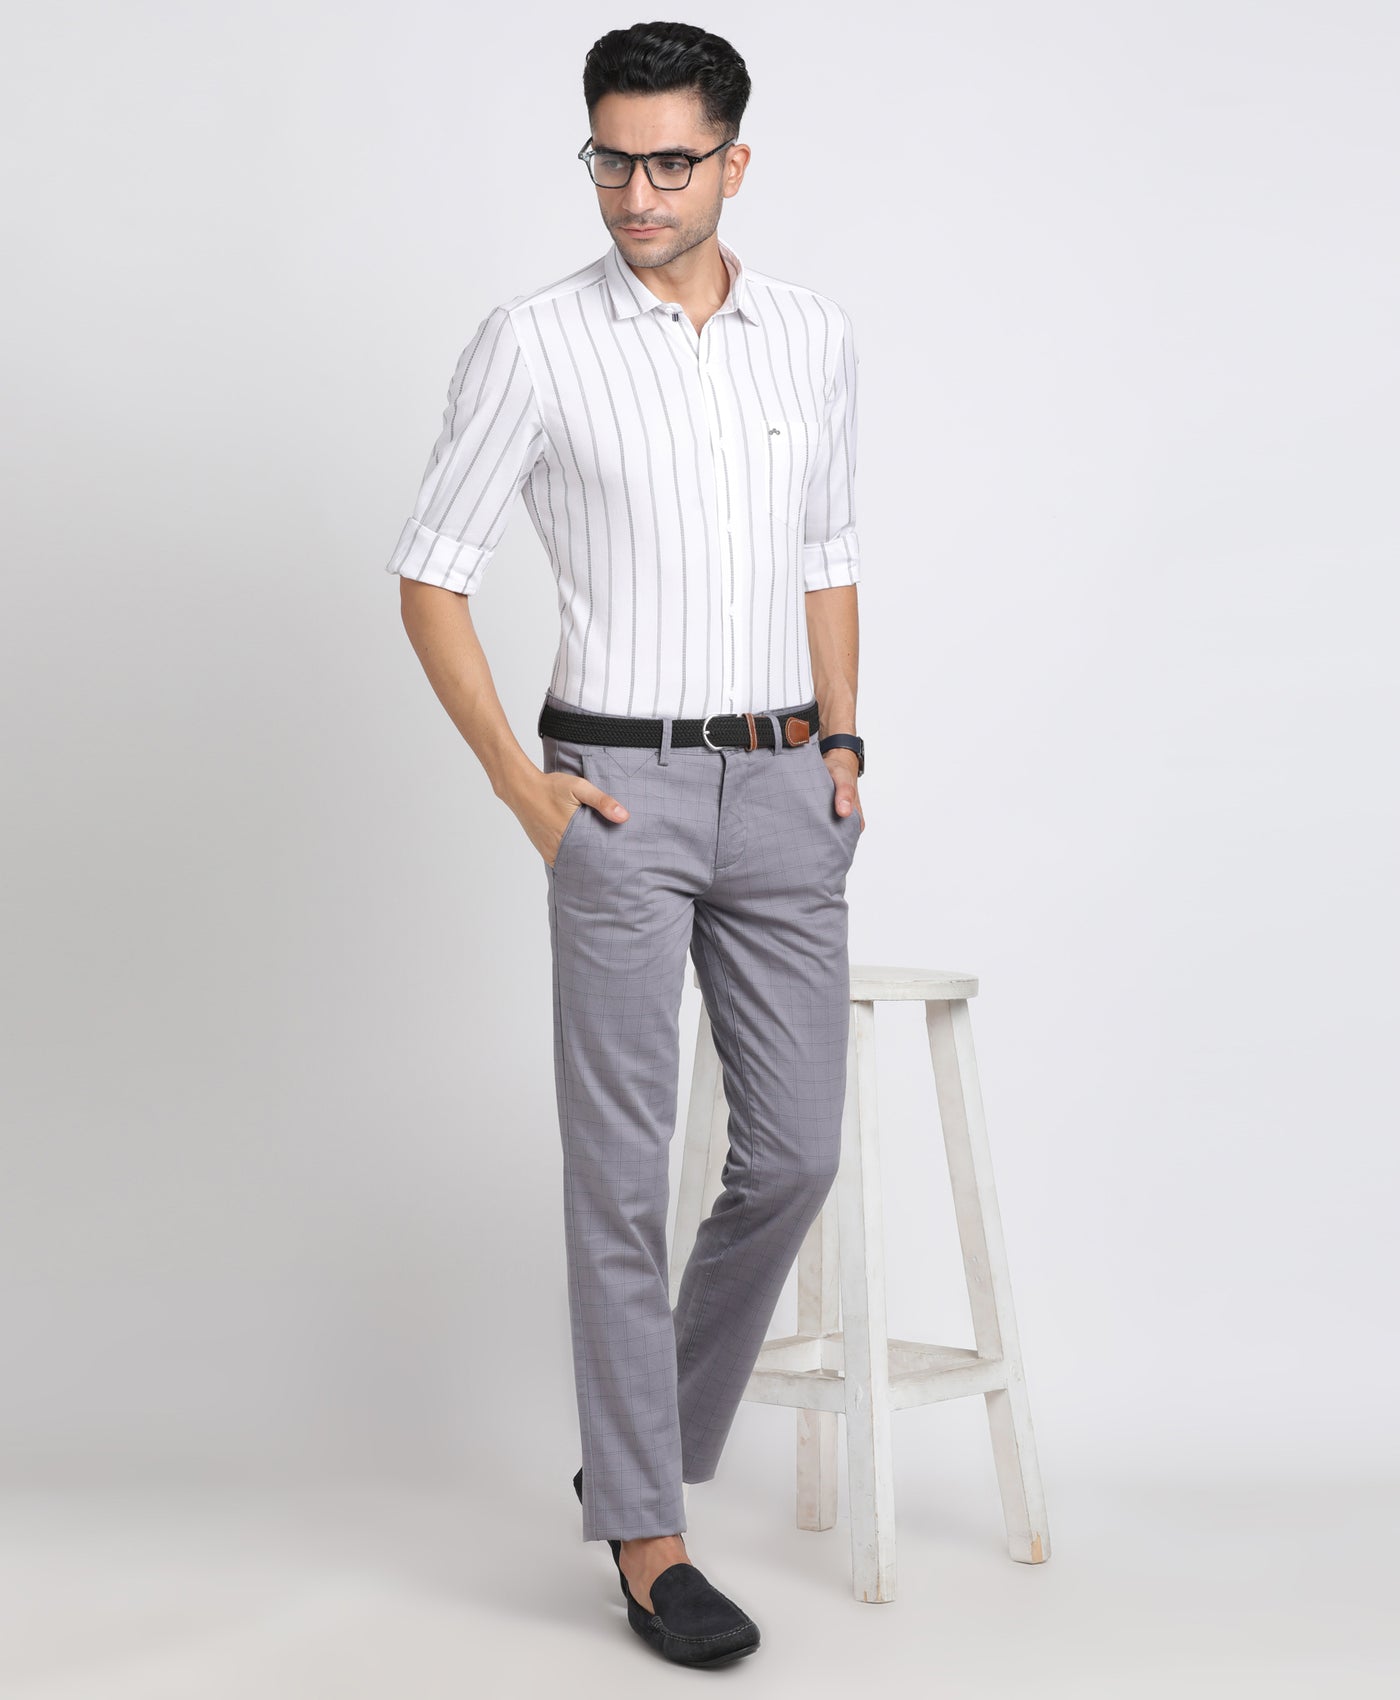 100% Cotton White Striped Slim Fit Full Sleeve Casual Shirt